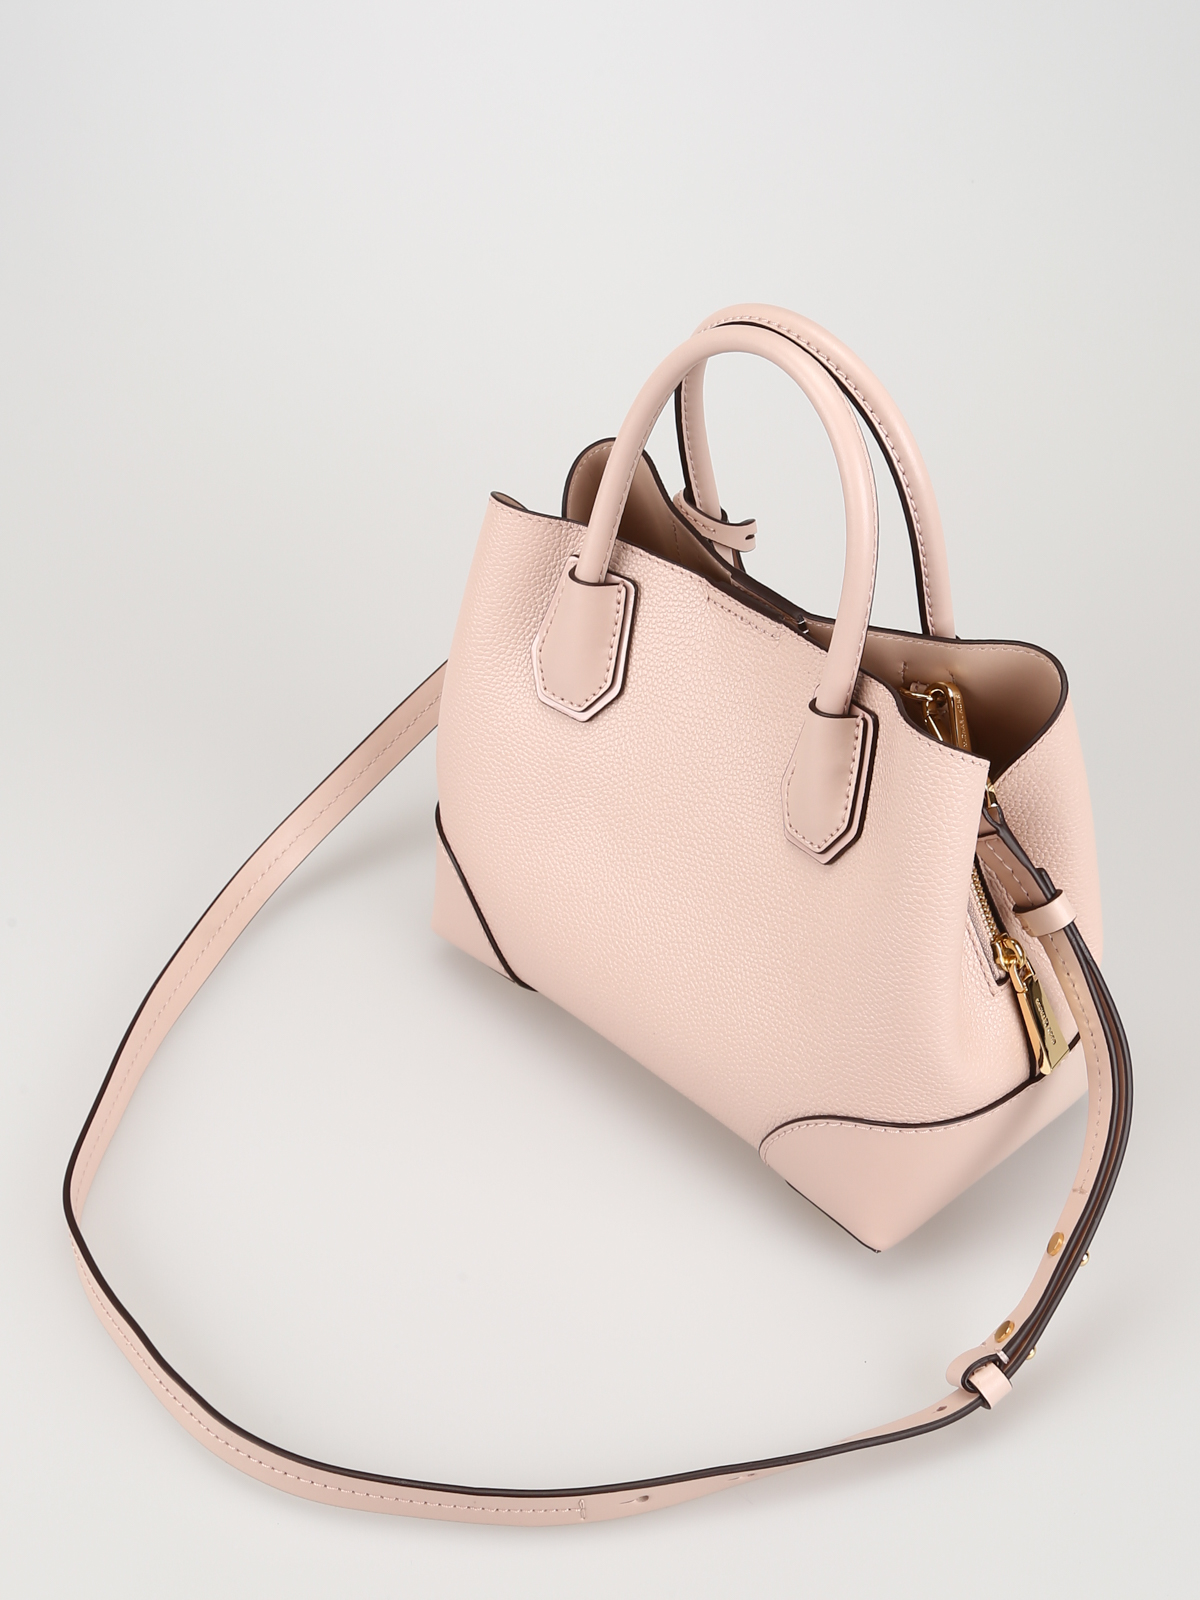 Totes bags Michael Kors - Mercer Gallery soft pink small tote 